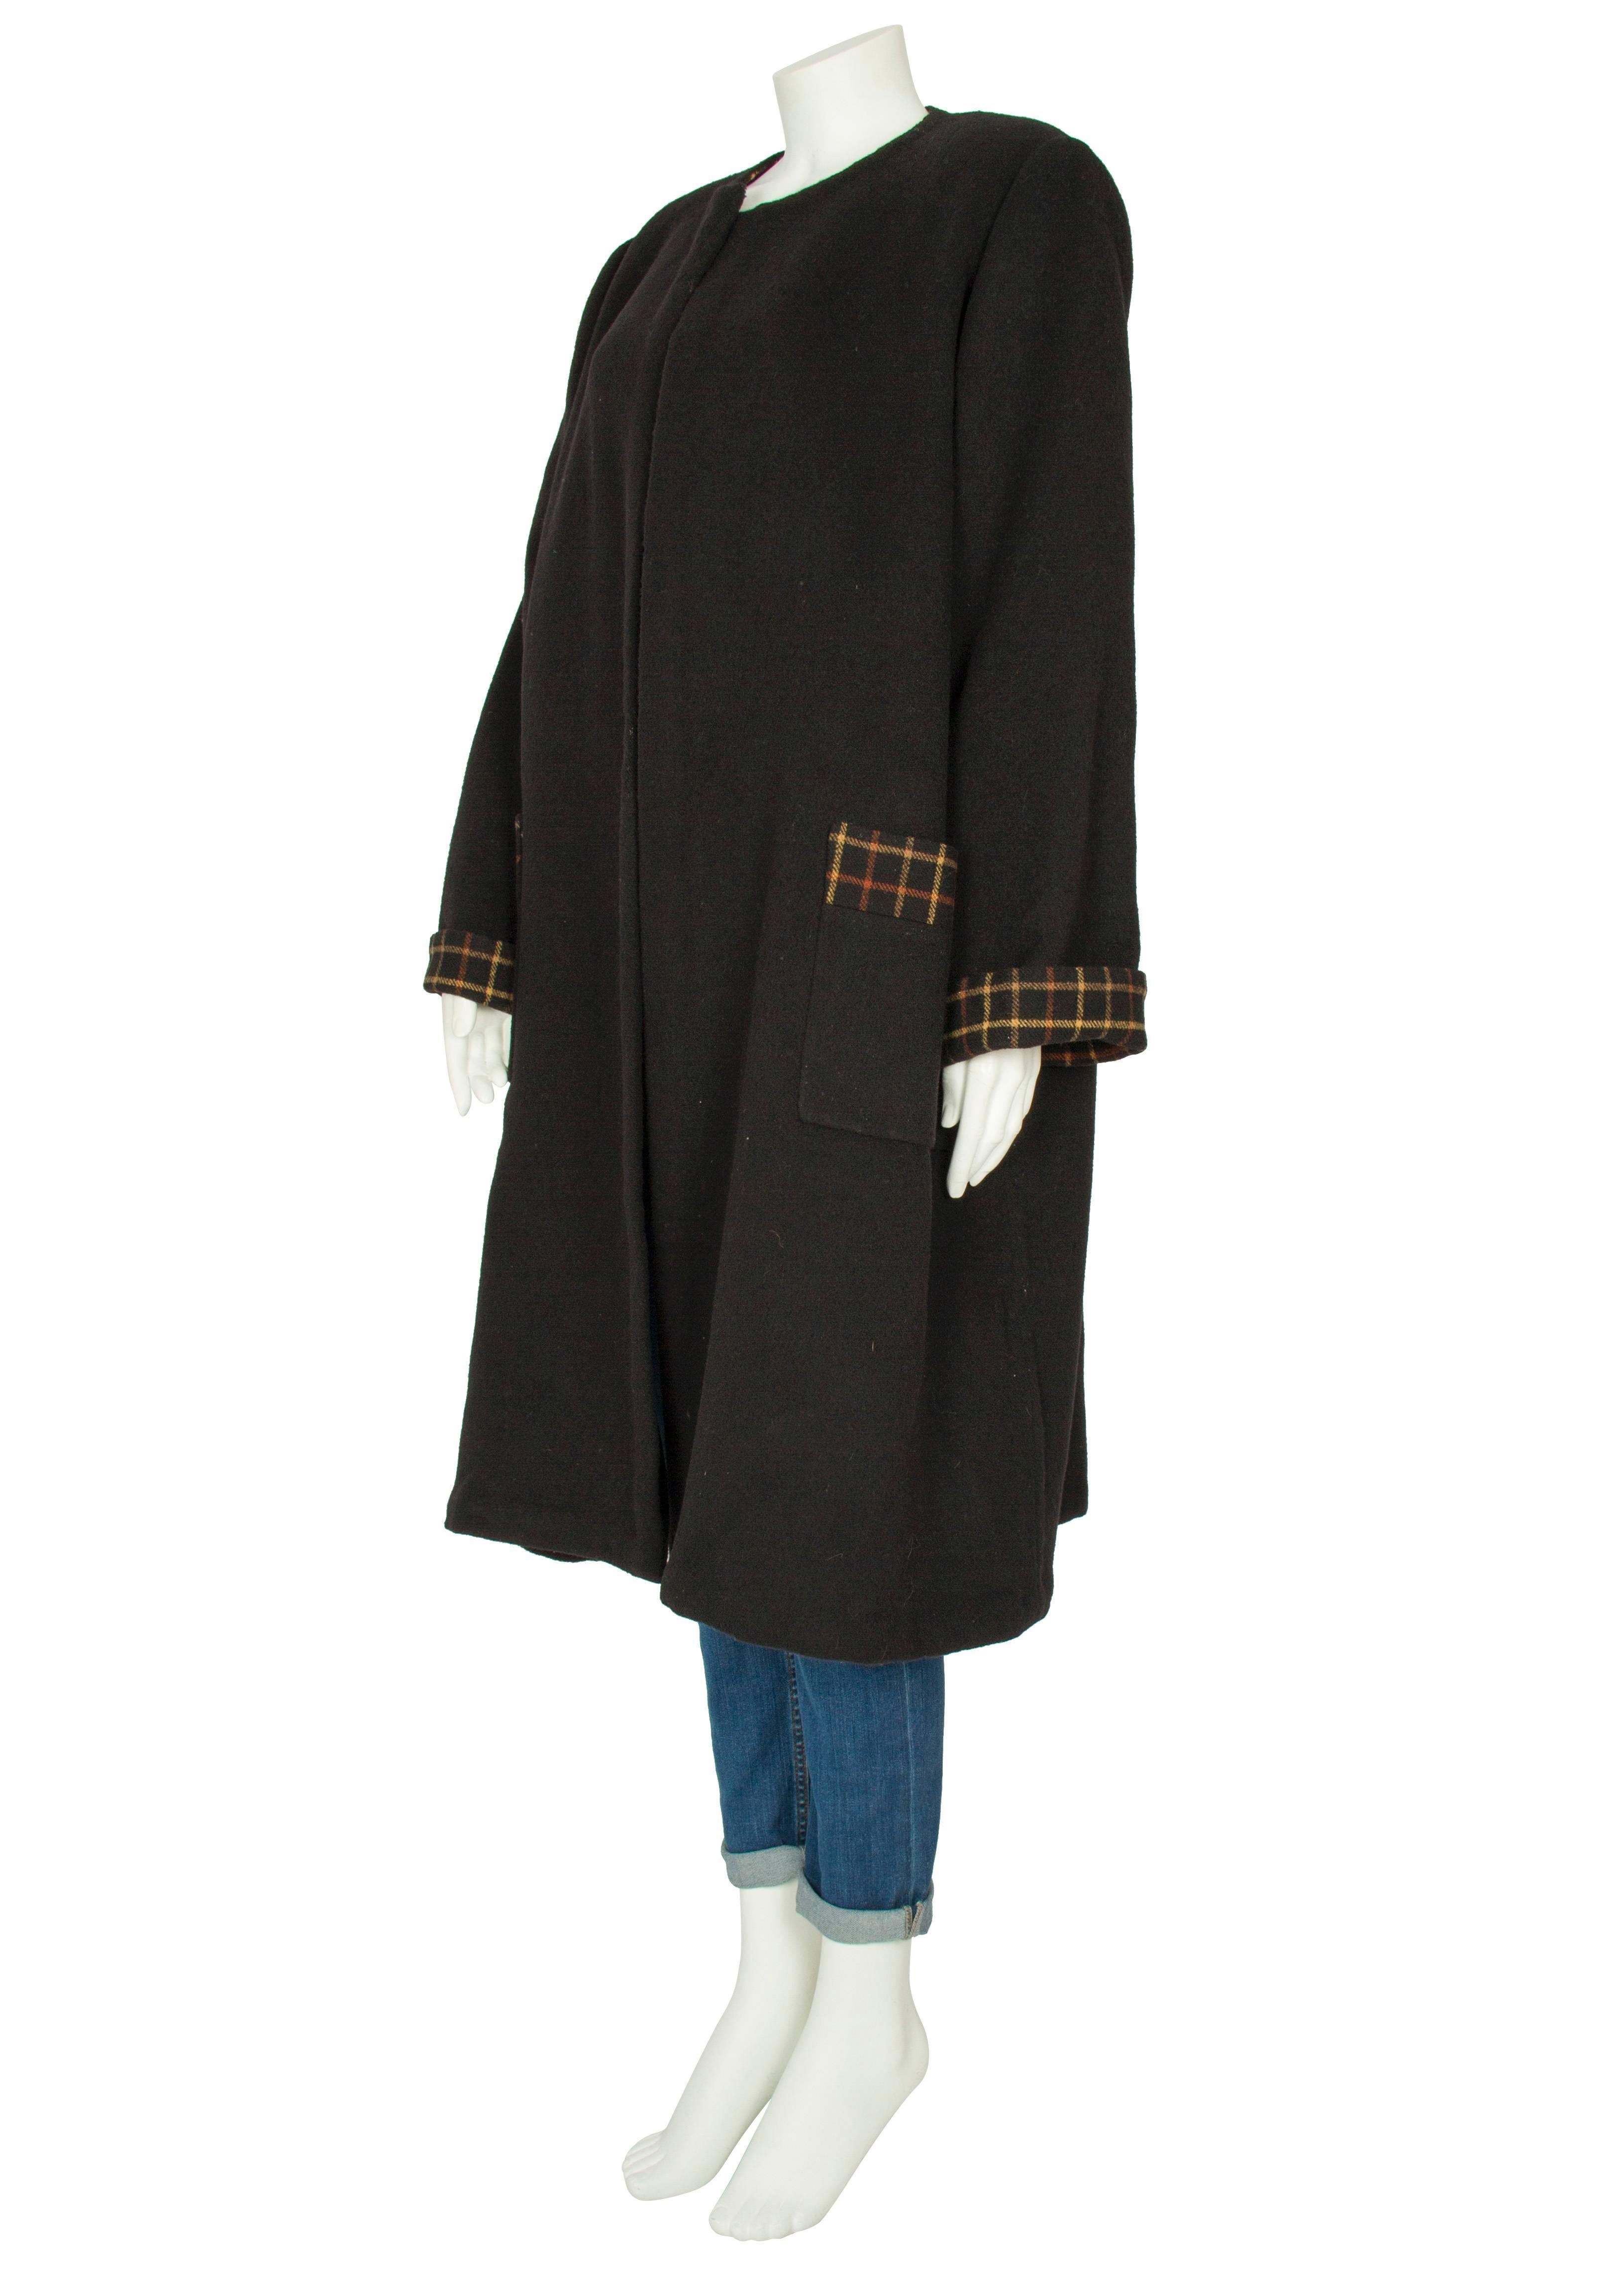 An oversized swing throw-over coat by London society couturier Harald, constructed from a heavy black wool and lined with a brown and caramel checked wool fabric. The mid-length coat is a loose-fitting and collarless design and features long